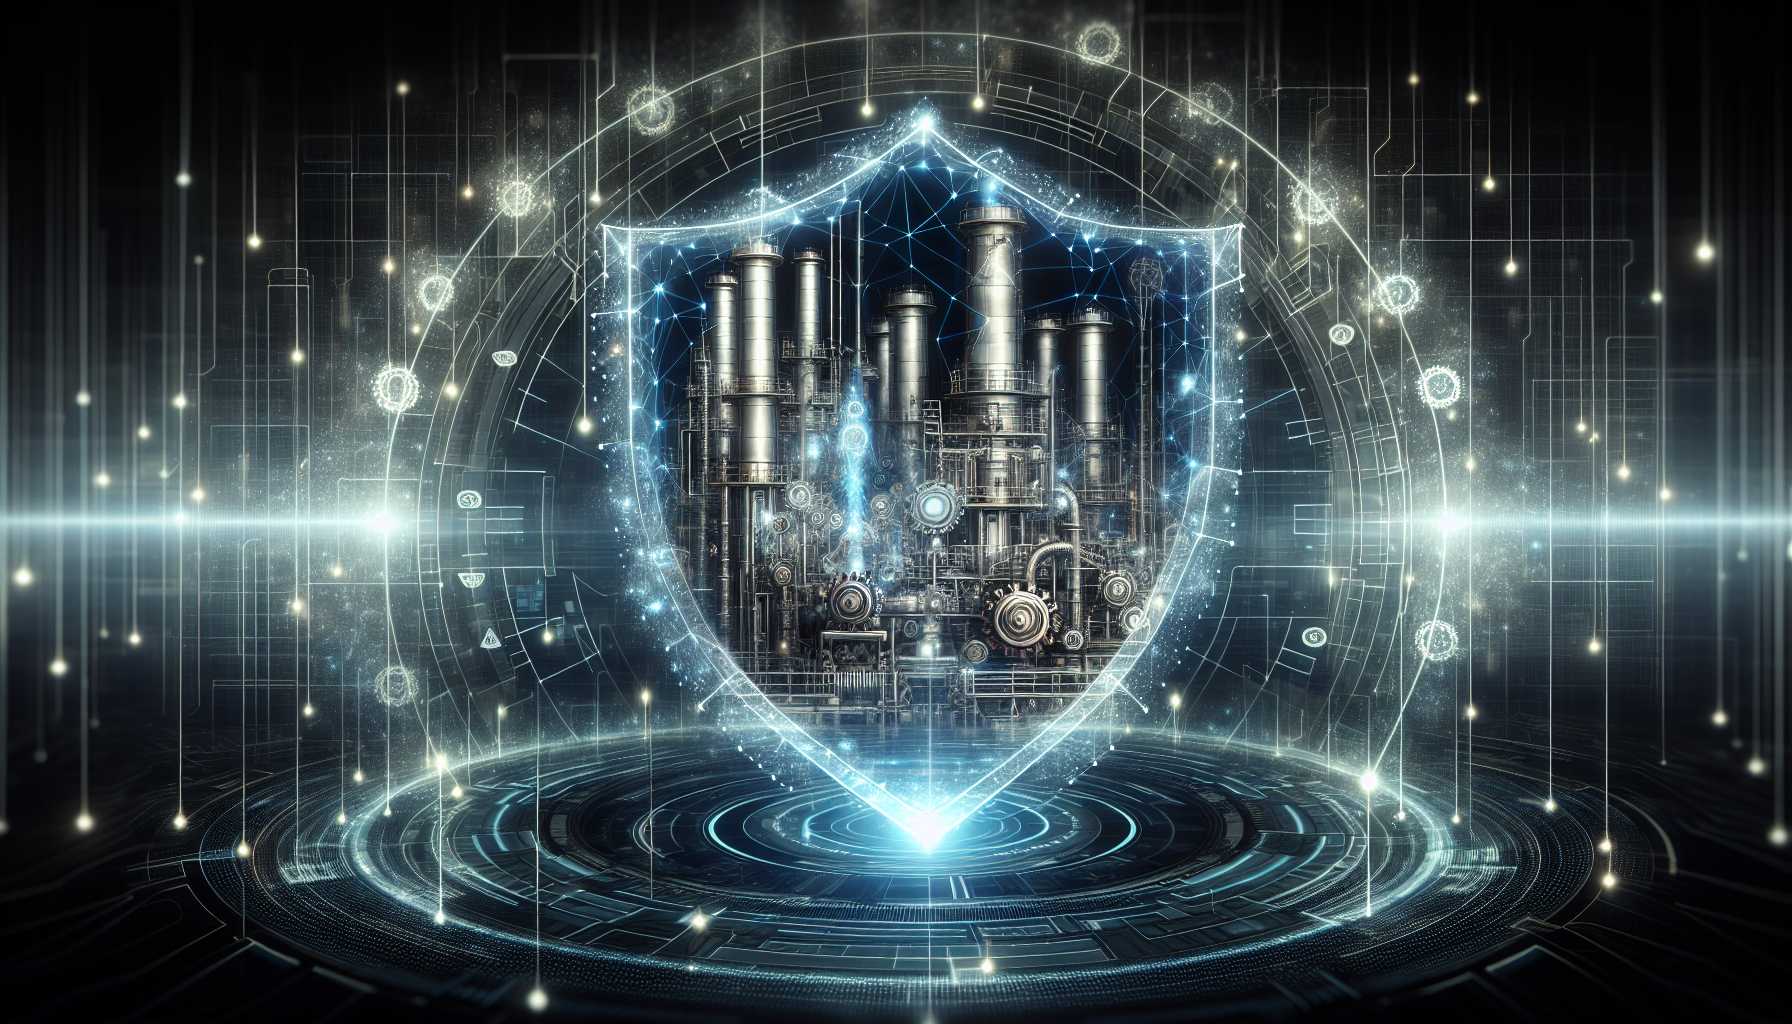 Abstract visualization of a cyber shield protecting industrial machinery